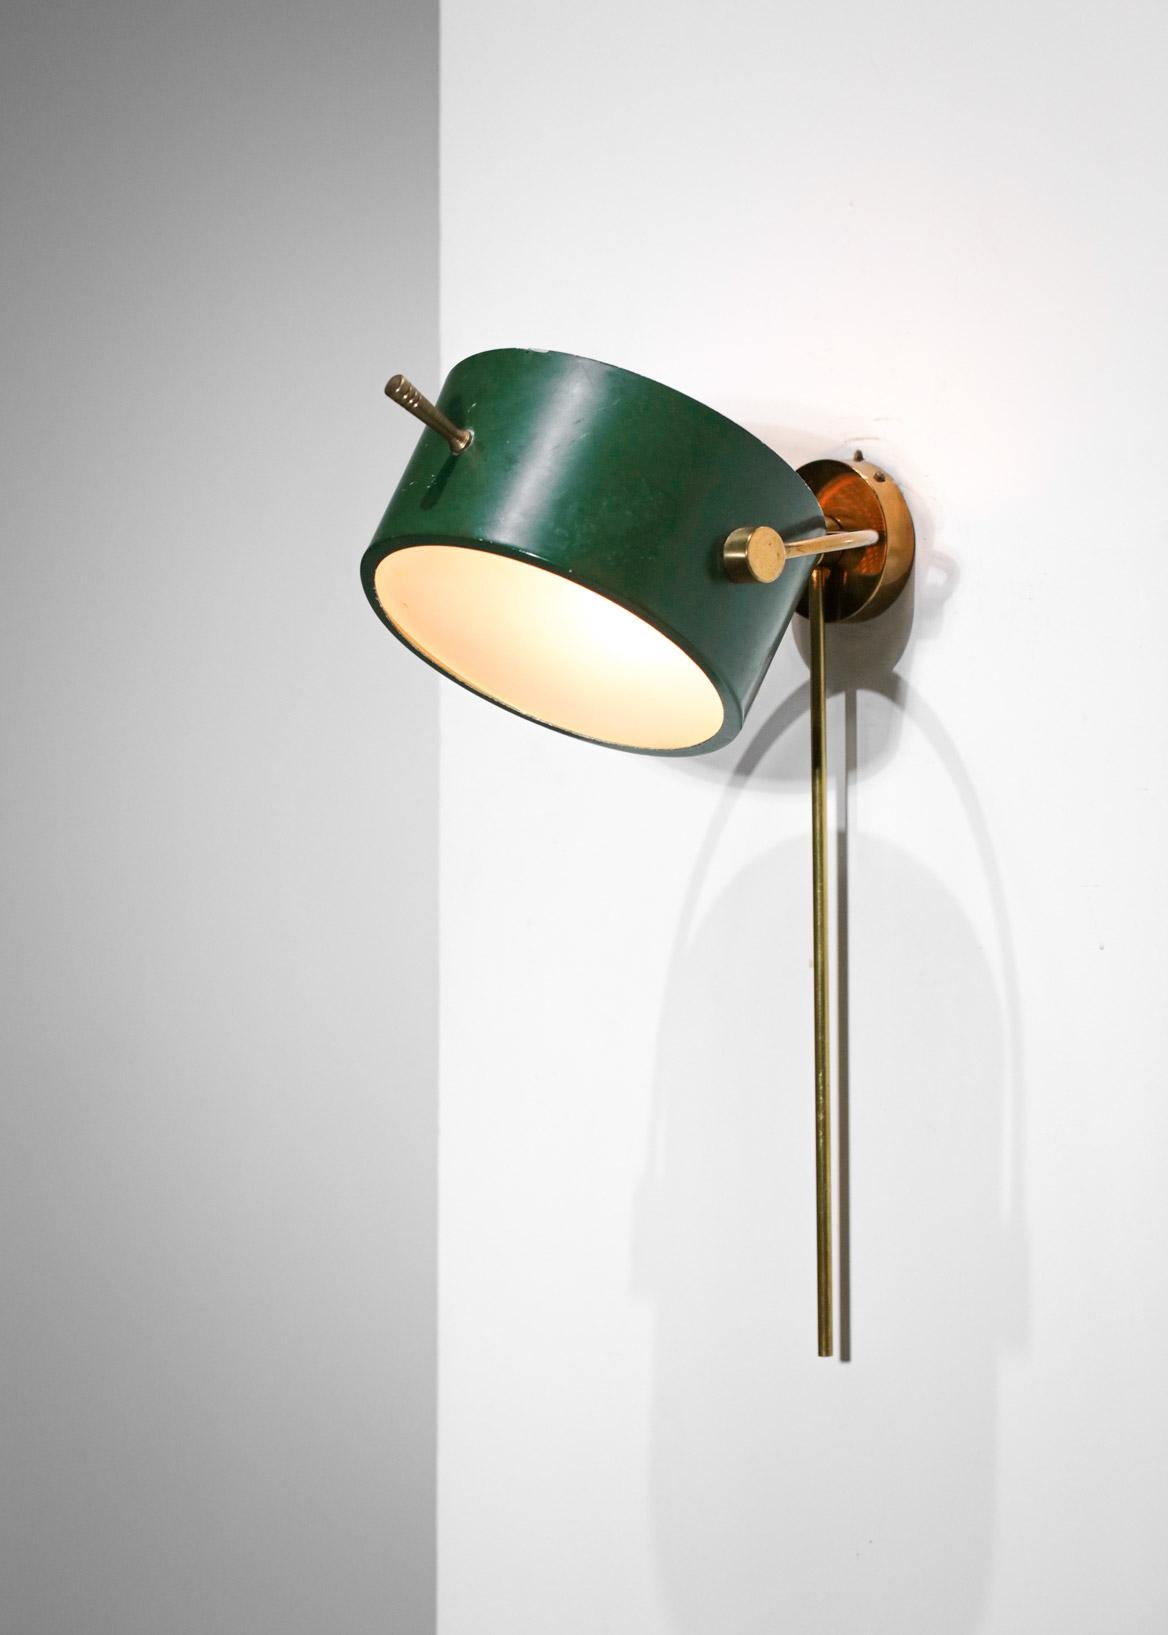 Rare 50's French Wall Lamp by Lunel Dark Green in Style of Mathieu Mategot, F420 1